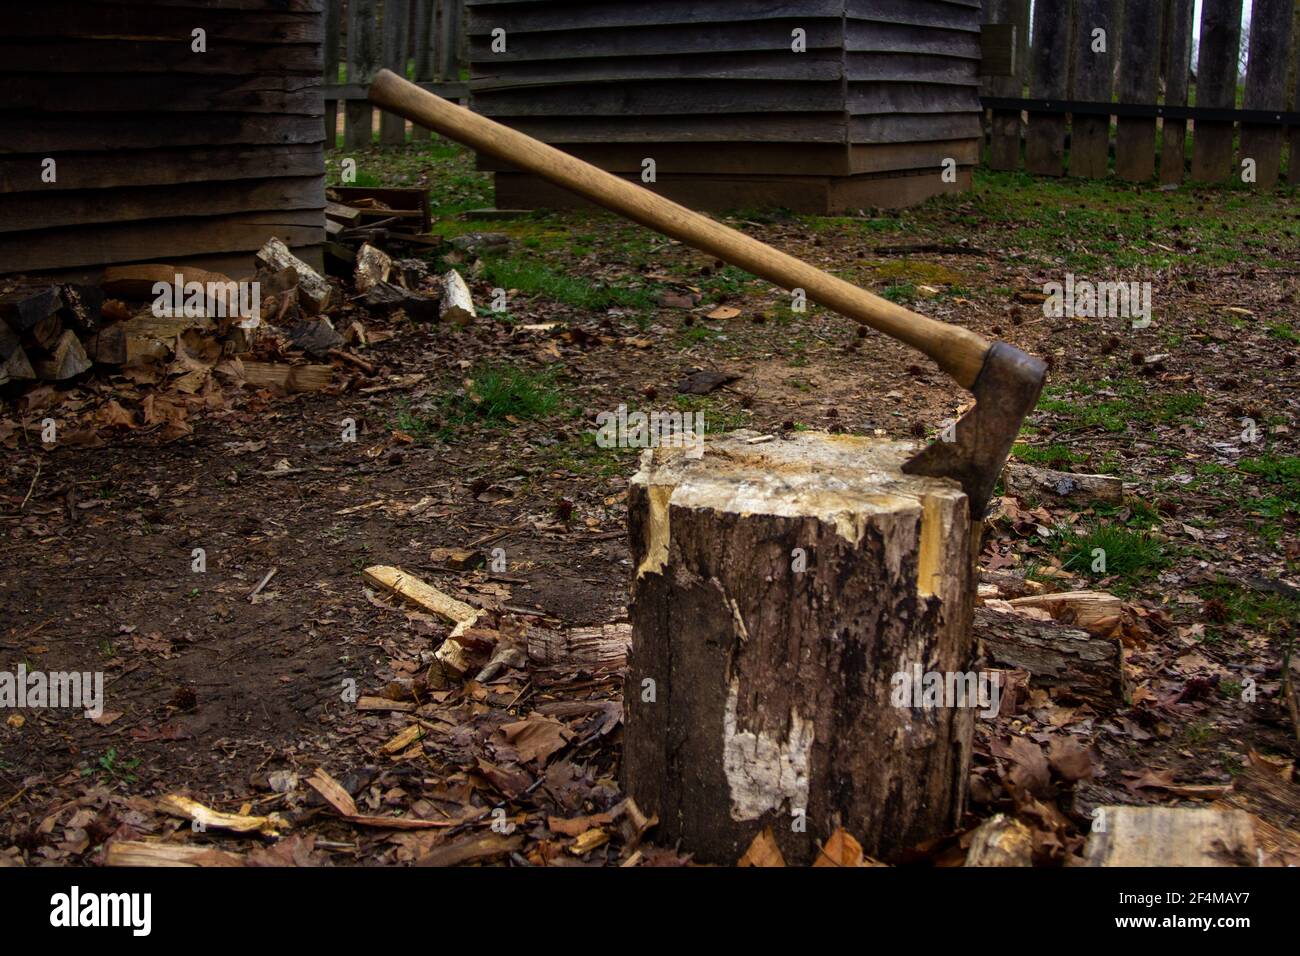 Axe of the type used in the 17th century colony at Henryco. Stock Photo